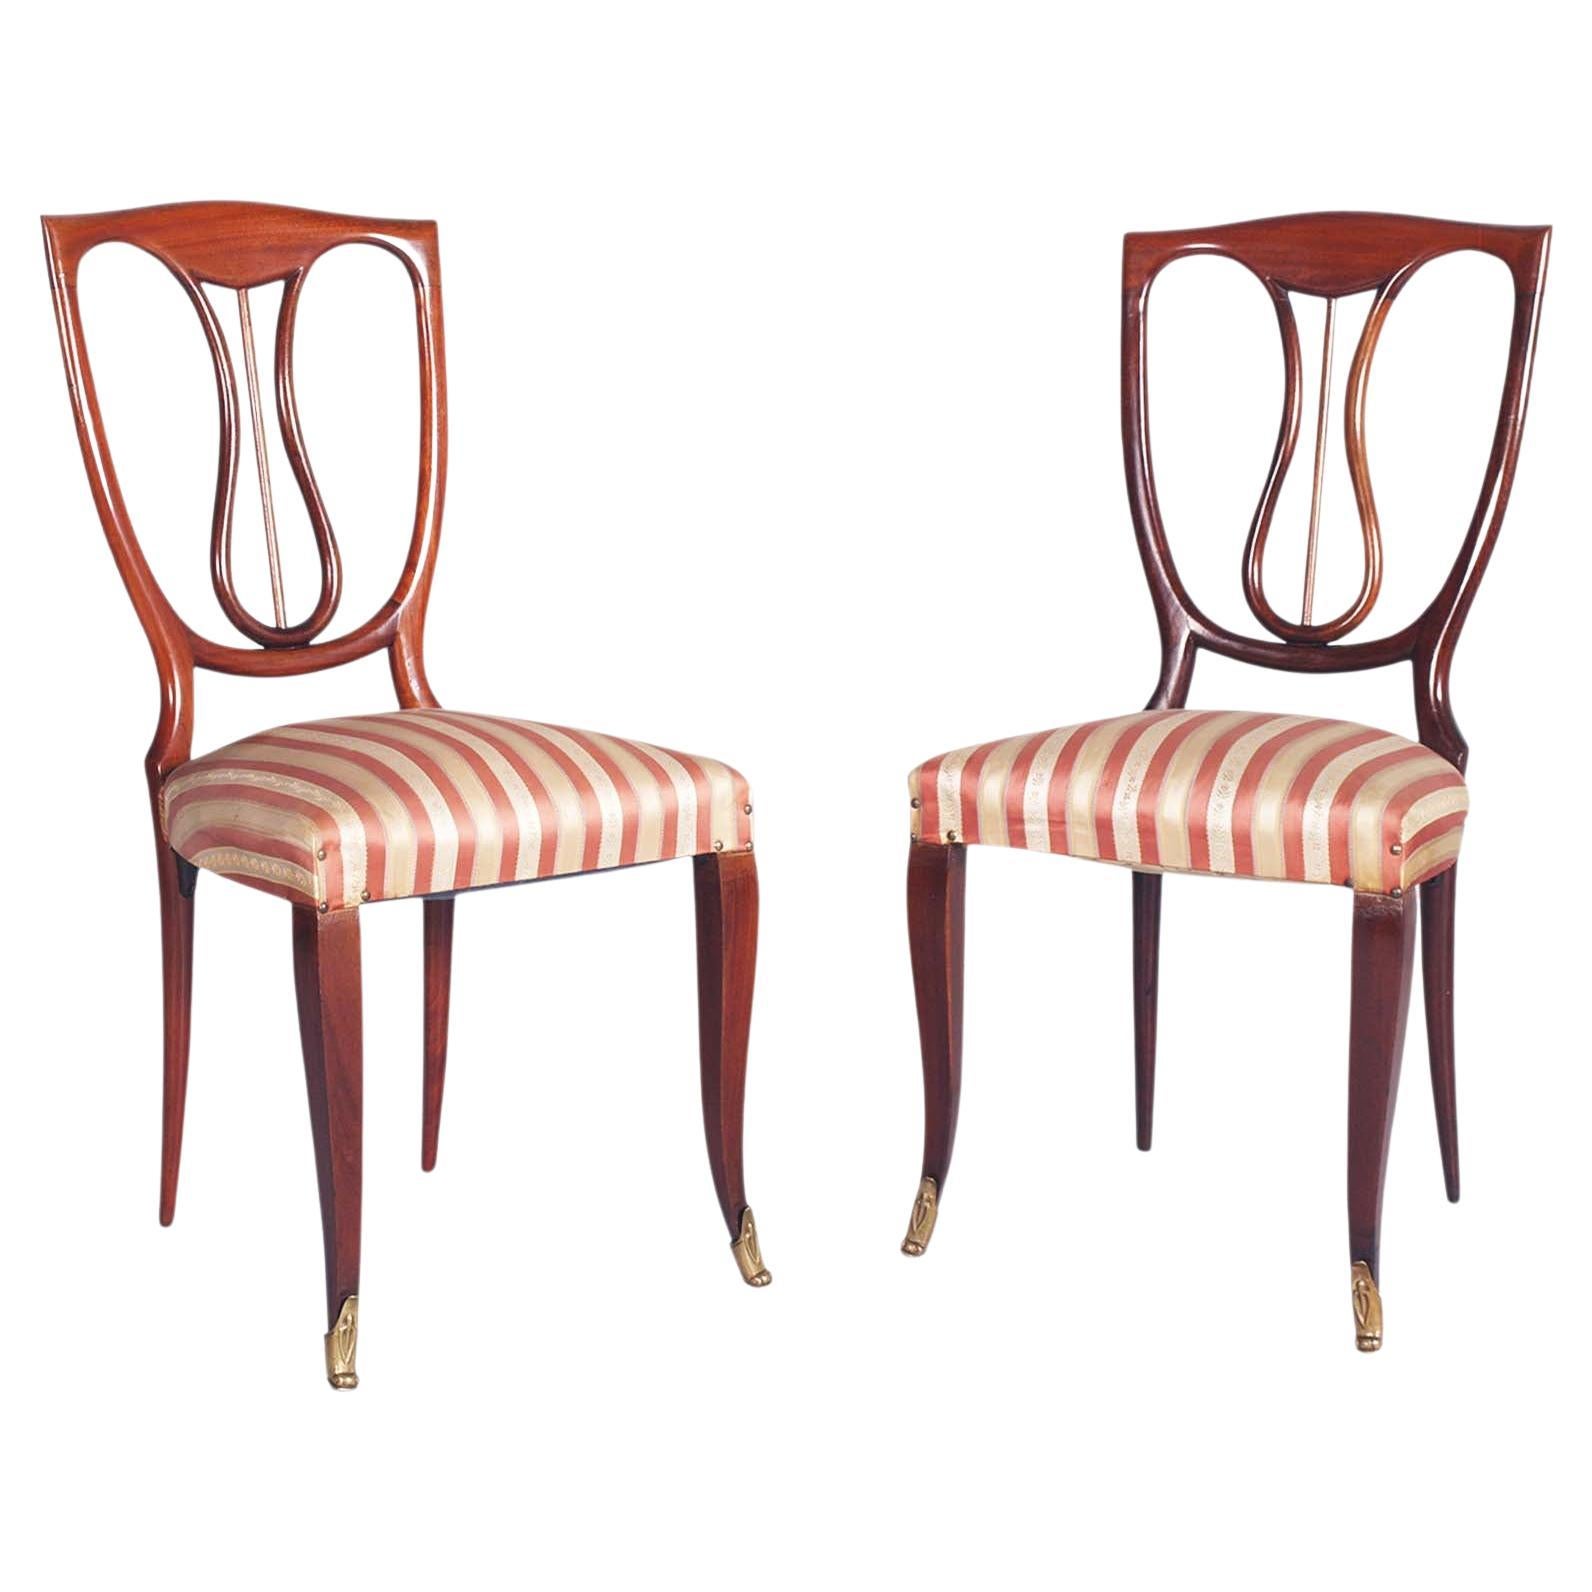 Pair 1940s Side Hall Chairs in Mahogany Melchiorre Bega Attributed, Springs Seat